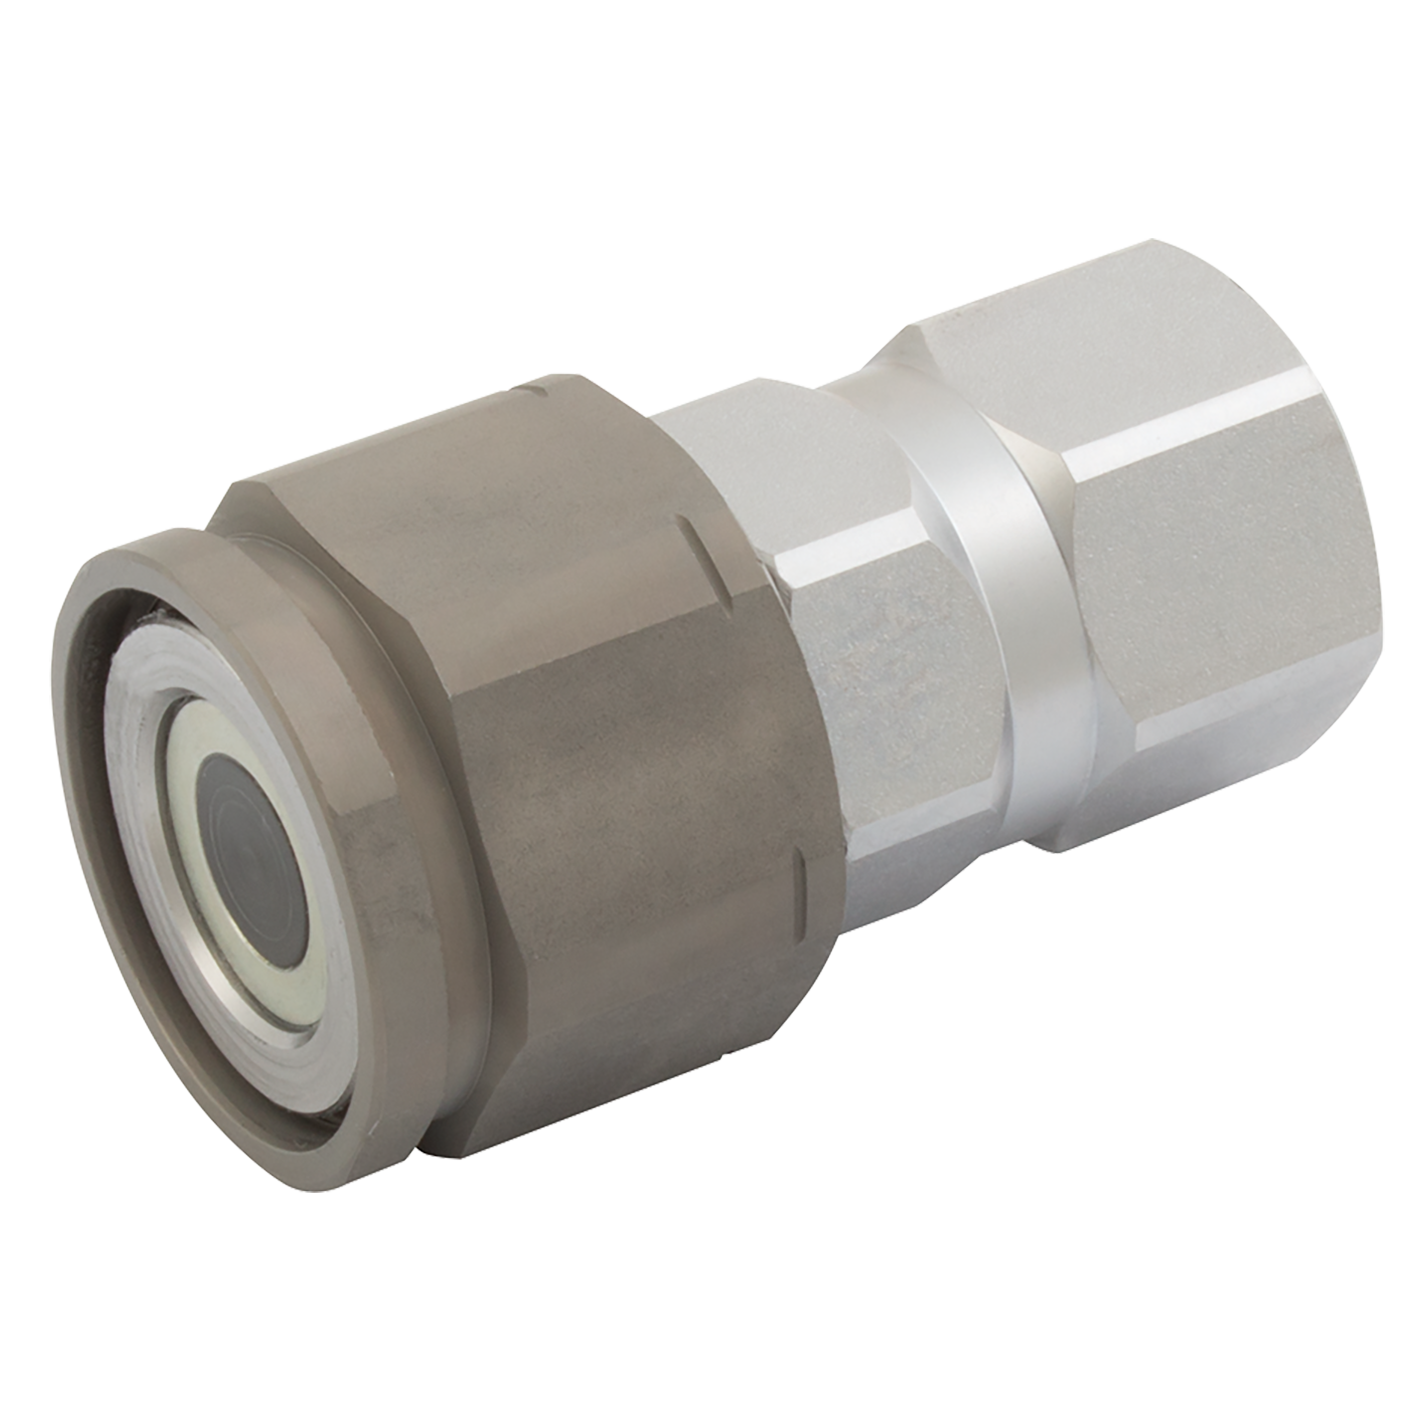 1.1/2"BSP ISO40 FF SCREW CON CARRIER